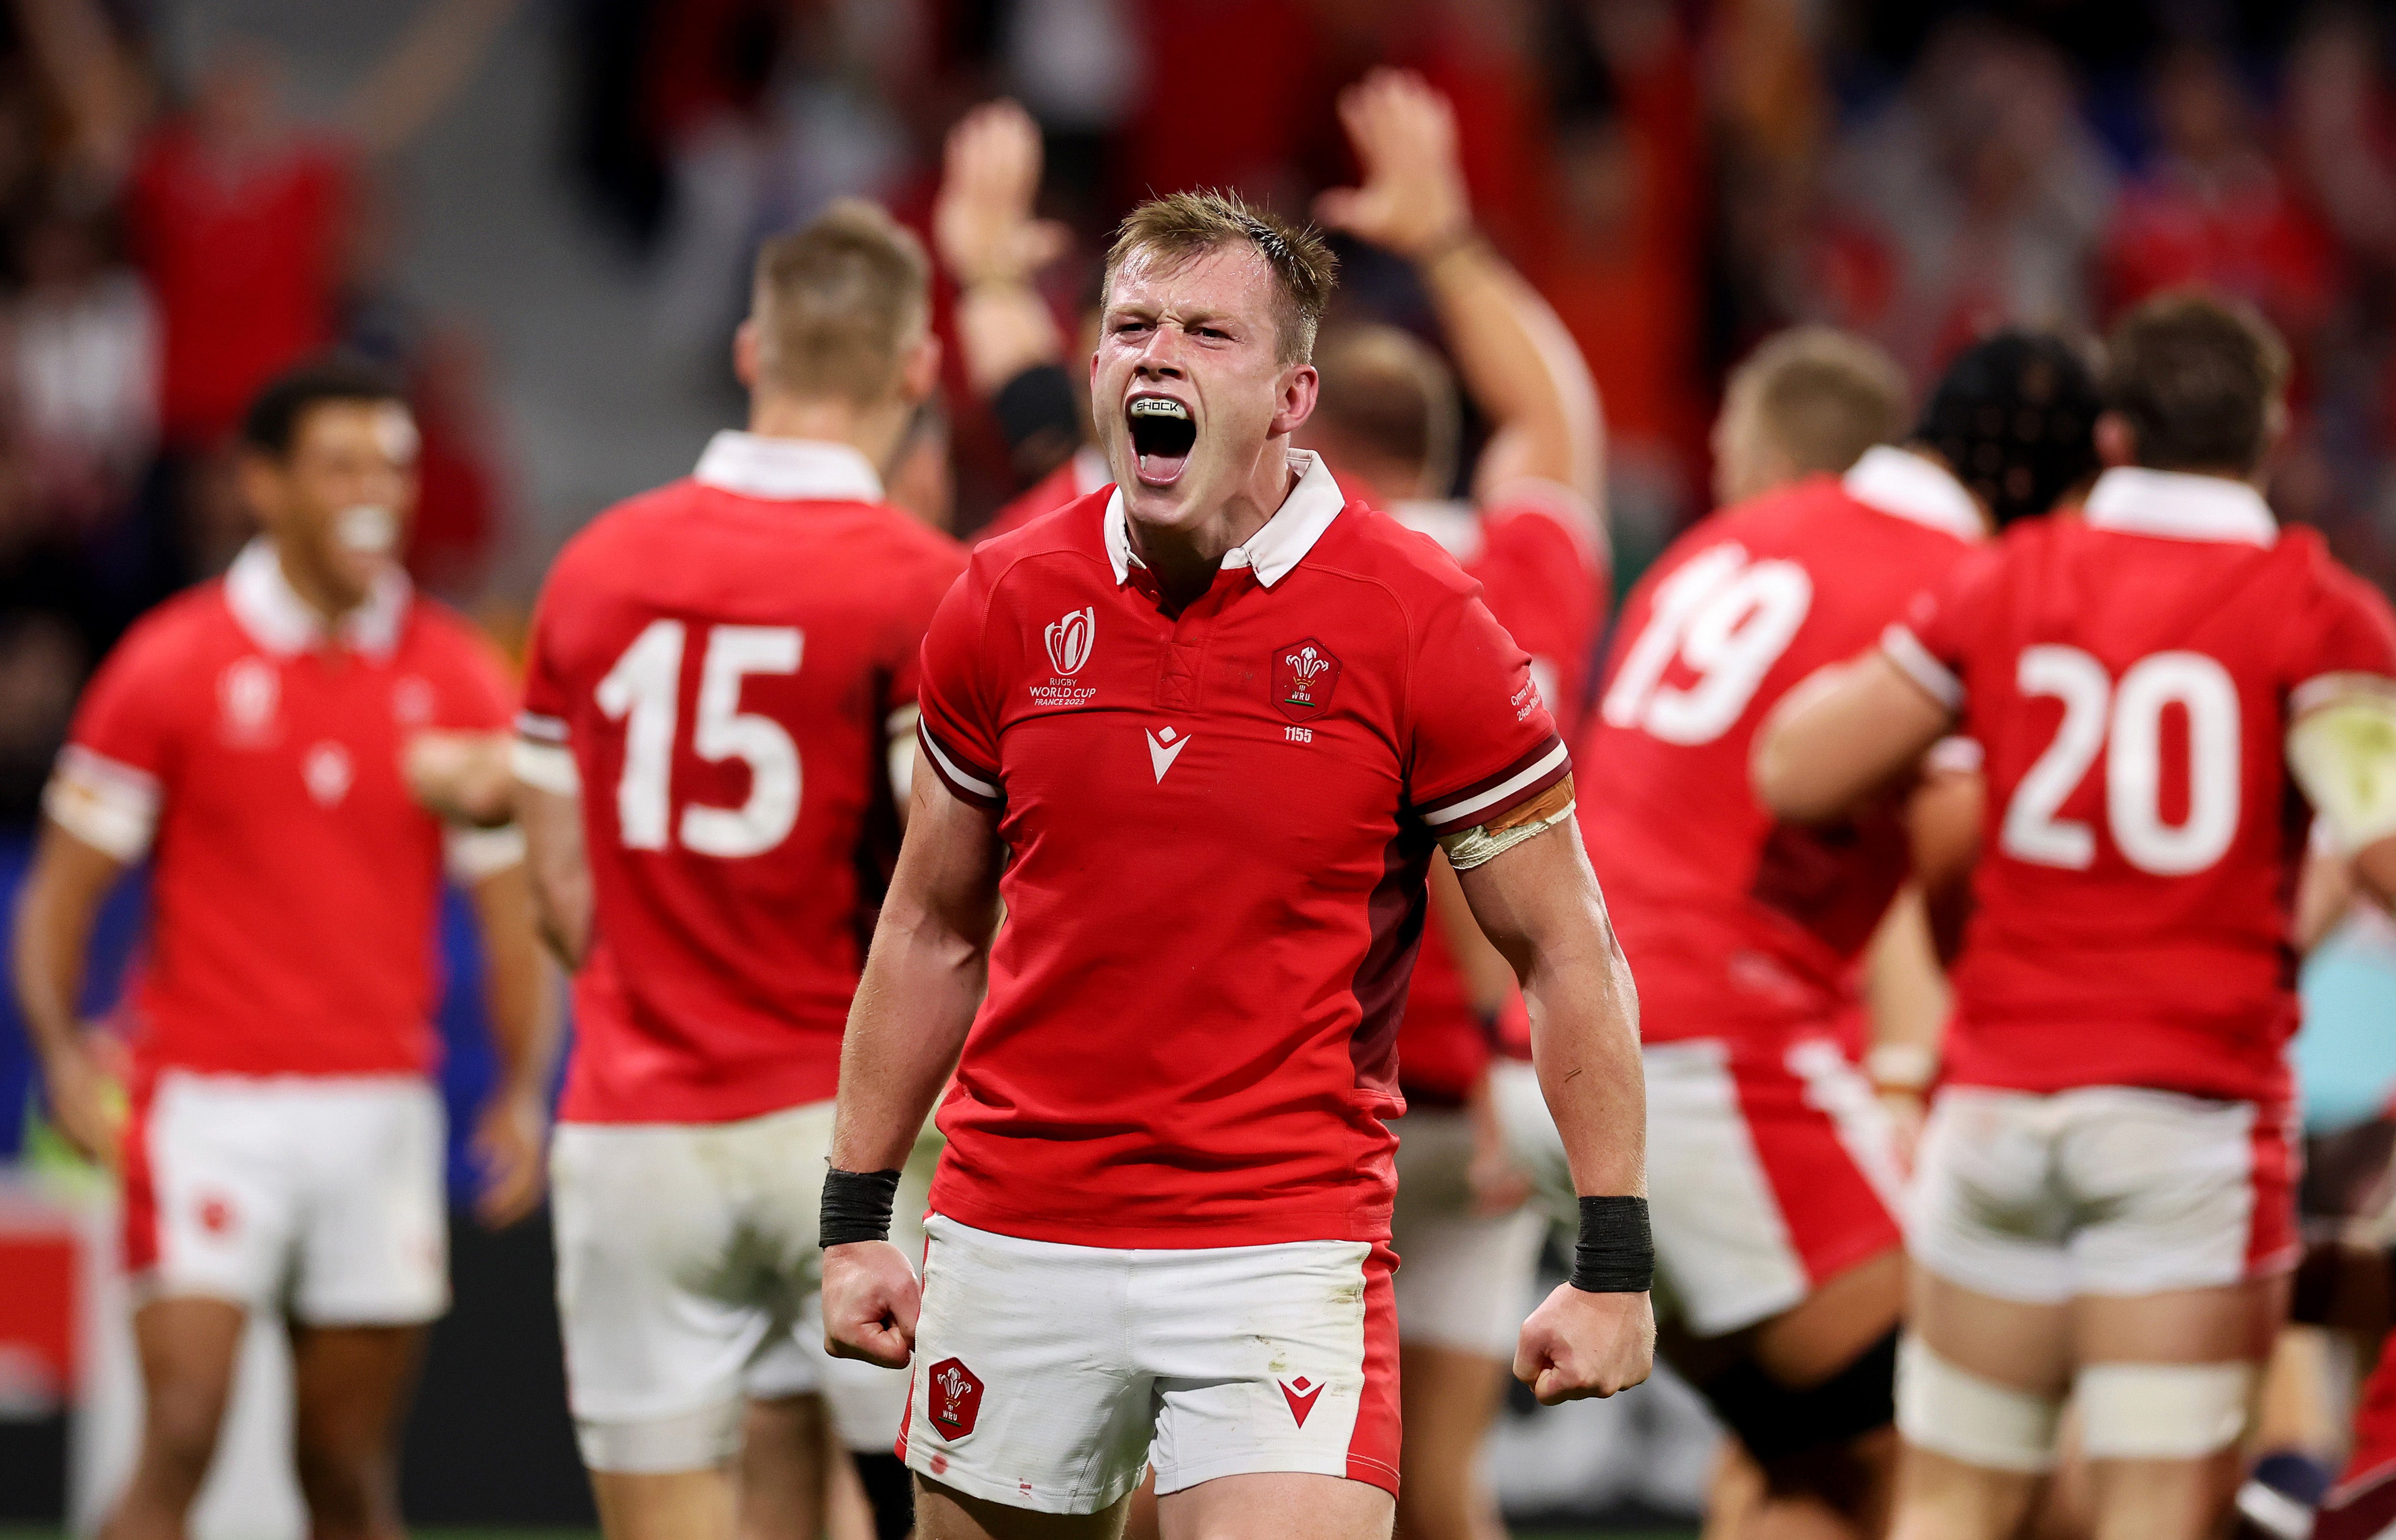 Wales Rugby World Cup fixtures Full schedule and route to the final